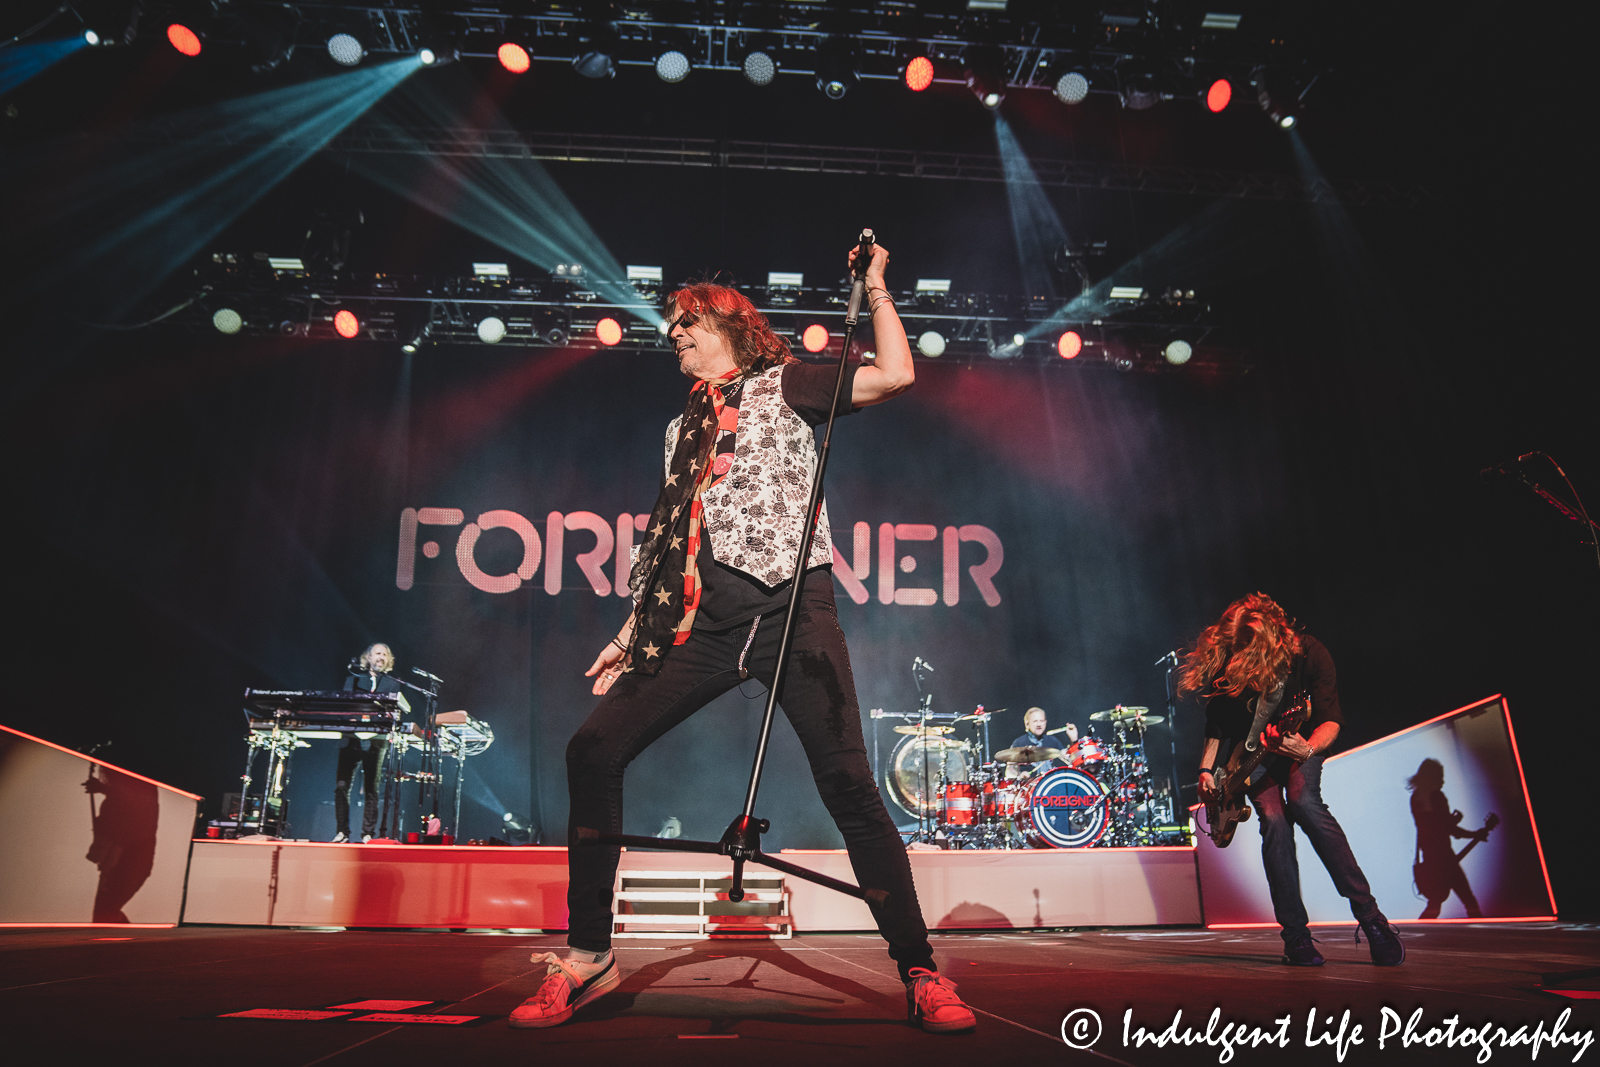 Foreigner lead vocalist Kelly Hansen performing with bass player Jeff Pilson, keyboardist Michael Bluestein and drummer Chris Frazier at Hartman Arena in Park City, KS on April 30, 2023.